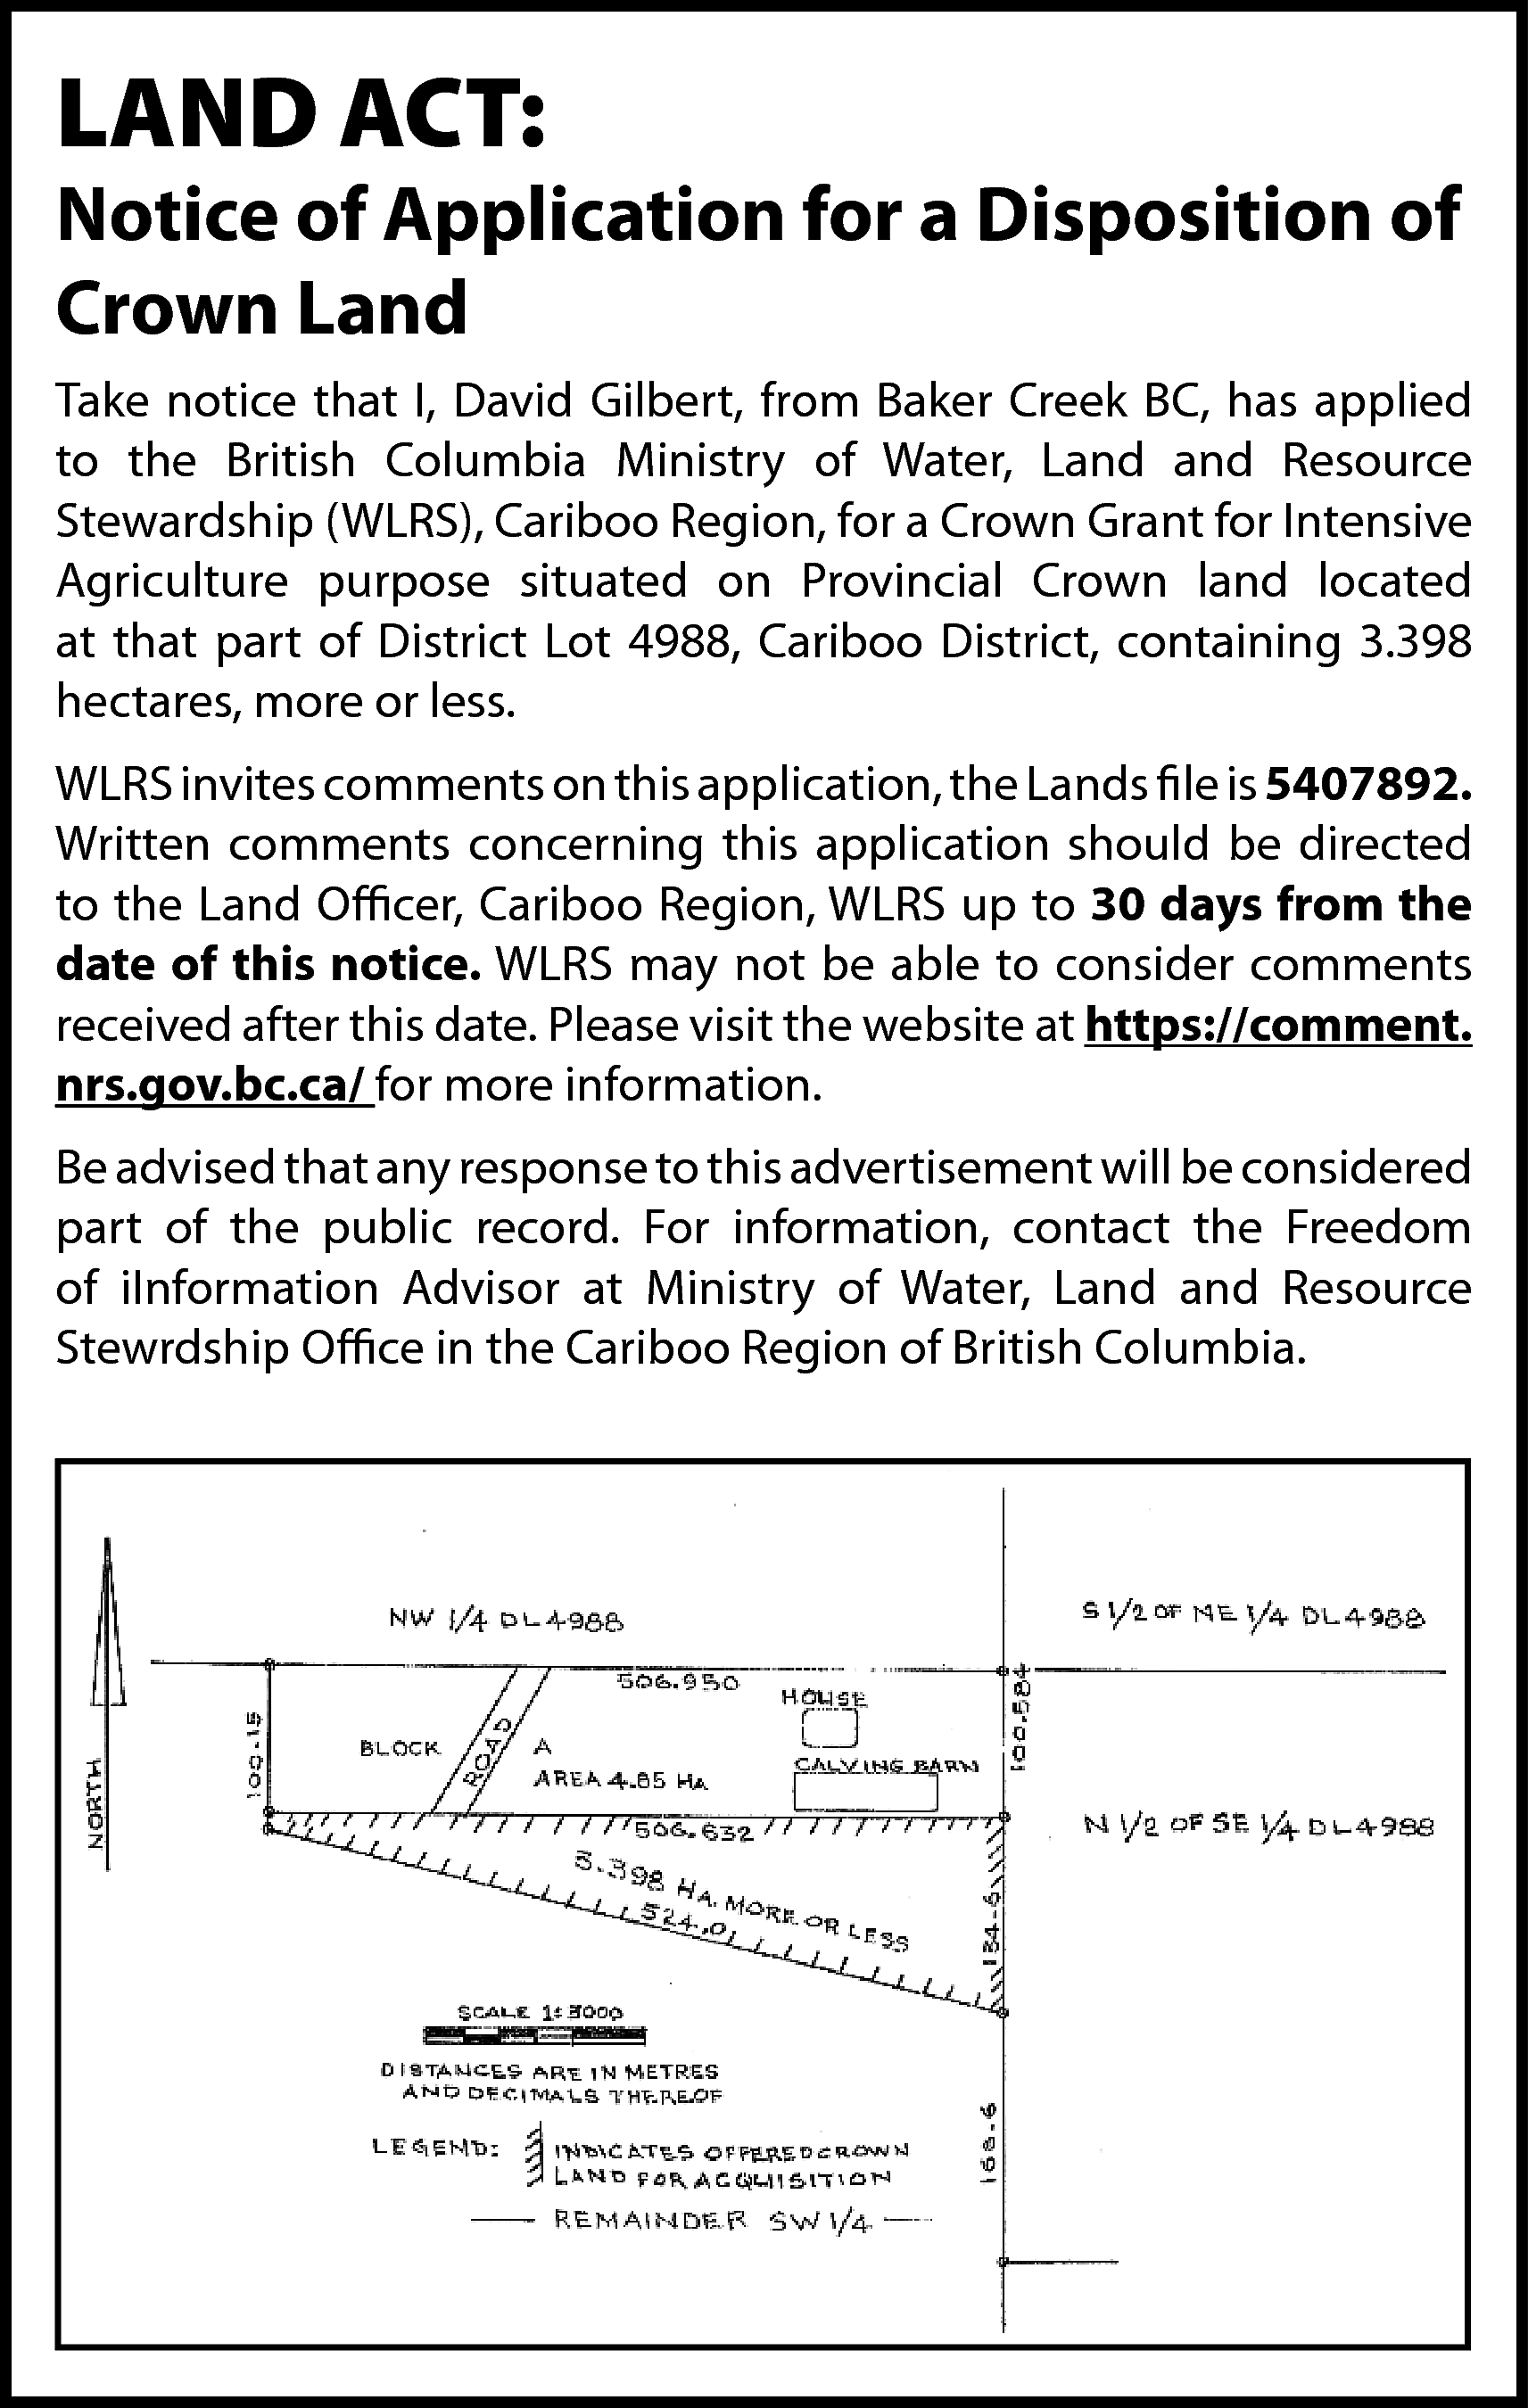 LAND ACT: <br> <br>Notice of  LAND ACT:    Notice of Application for a Disposition of  Crown Land  Take notice that I, David Gilbert, from Baker Creek BC, has applied  to the British Columbia Ministry of Water, Land and Resource  Stewardship (WLRS), Cariboo Region, for a Crown Grant for Intensive  Agriculture purpose situated on Provincial Crown land located  at that part of District Lot 4988, Cariboo District, containing 3.398  hectares, more or less.  WLRS invites comments on this application, the Lands file is 5407892.  Written comments concerning this application should be directed  to the Land Officer, Cariboo Region, WLRS up to 30 days from the  date of this notice. WLRS may not be able to consider comments  received after this date. Please visit the website at https://comment.  nrs.gov.bc.ca/ for more information.  Be advised that any response to this advertisement will be considered  part of the public record. For information, contact the Freedom  of iInformation Advisor at Ministry of Water, Land and Resource  Stewrdship Office in the Cariboo Region of British Columbia.    